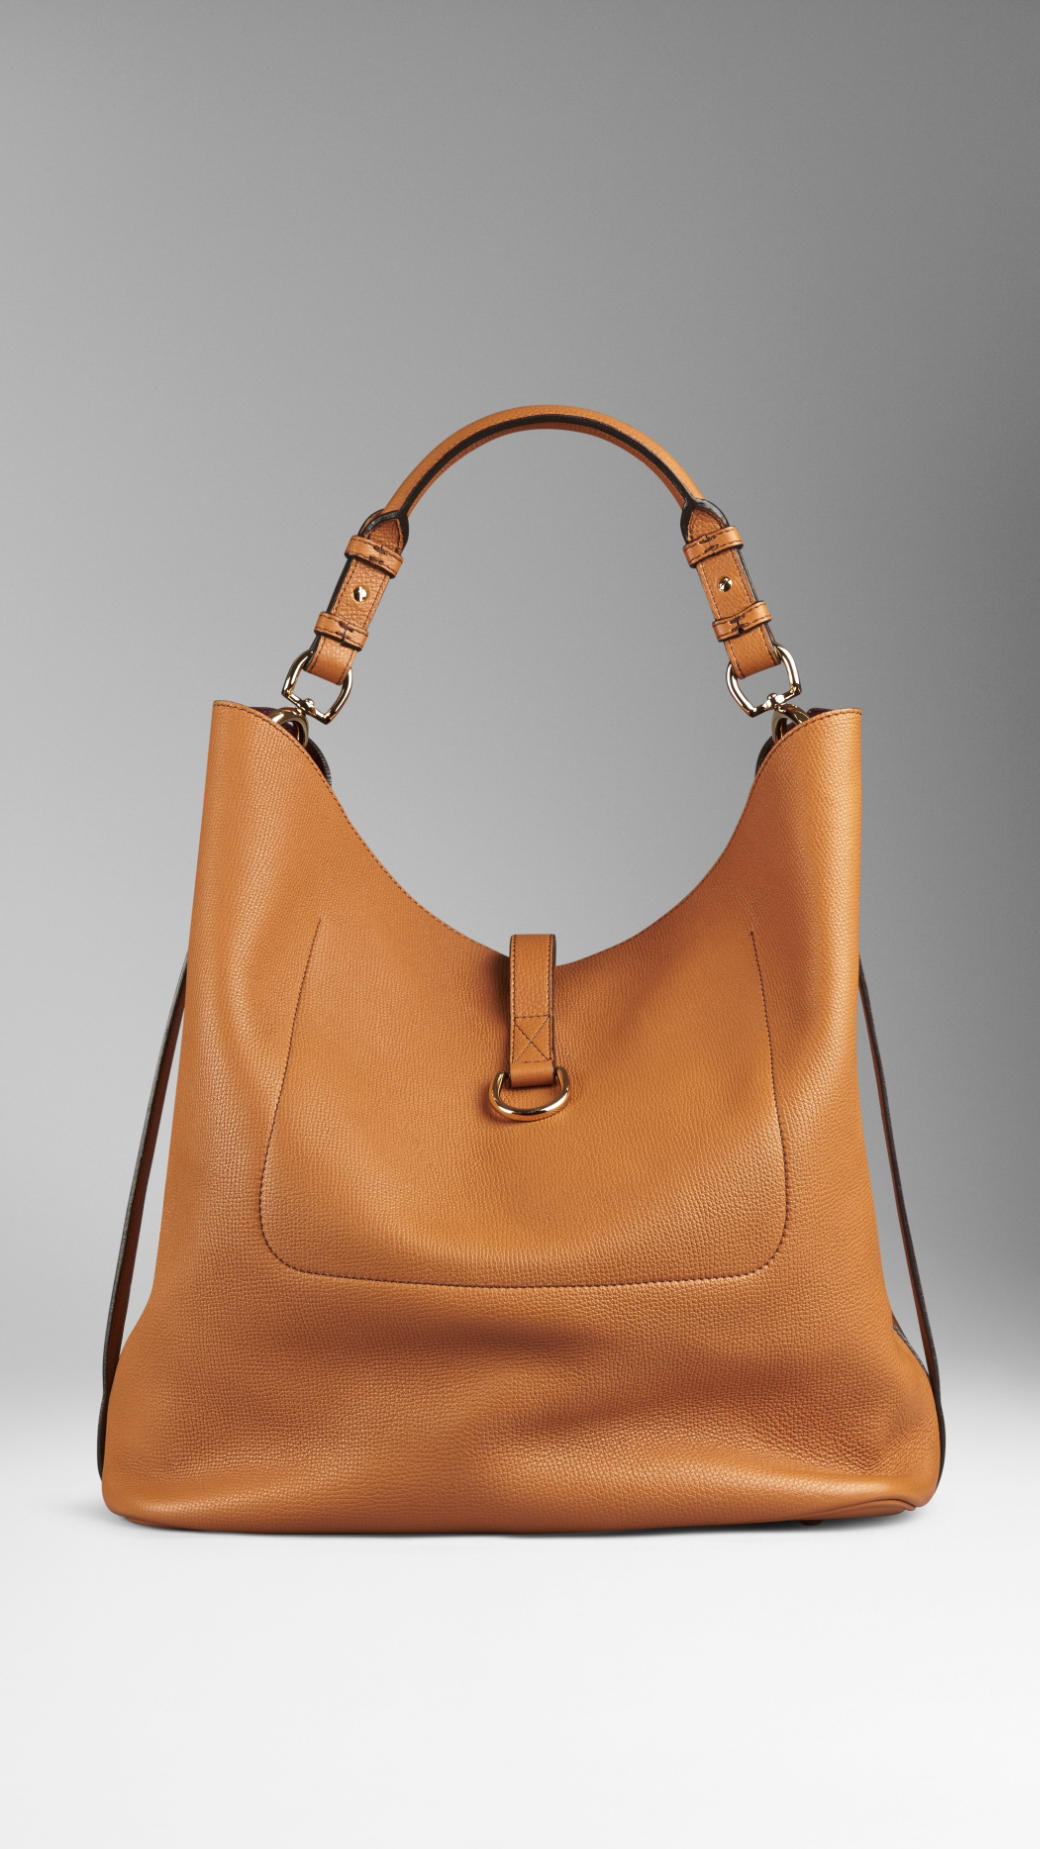 Lyst - Burberry Large Buckle Detail Leather Hobo Bag in Brown